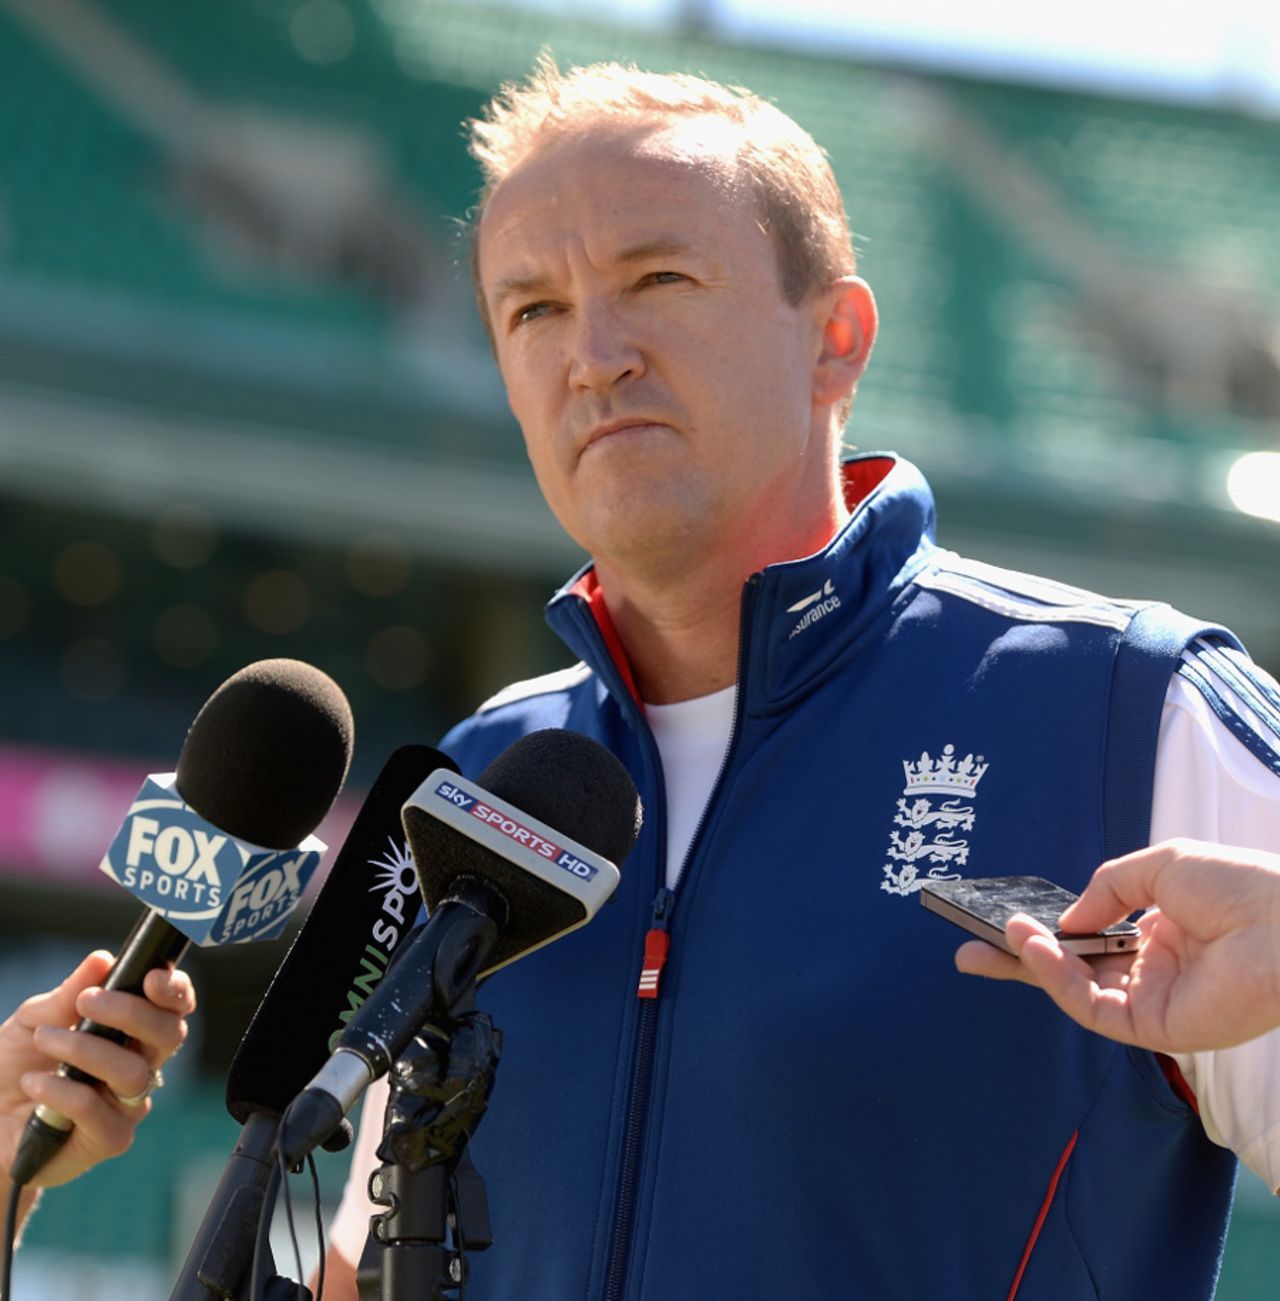 For a fifth time Andy Flower reflects on a crushing defeat, Sydney, January 6, 2014